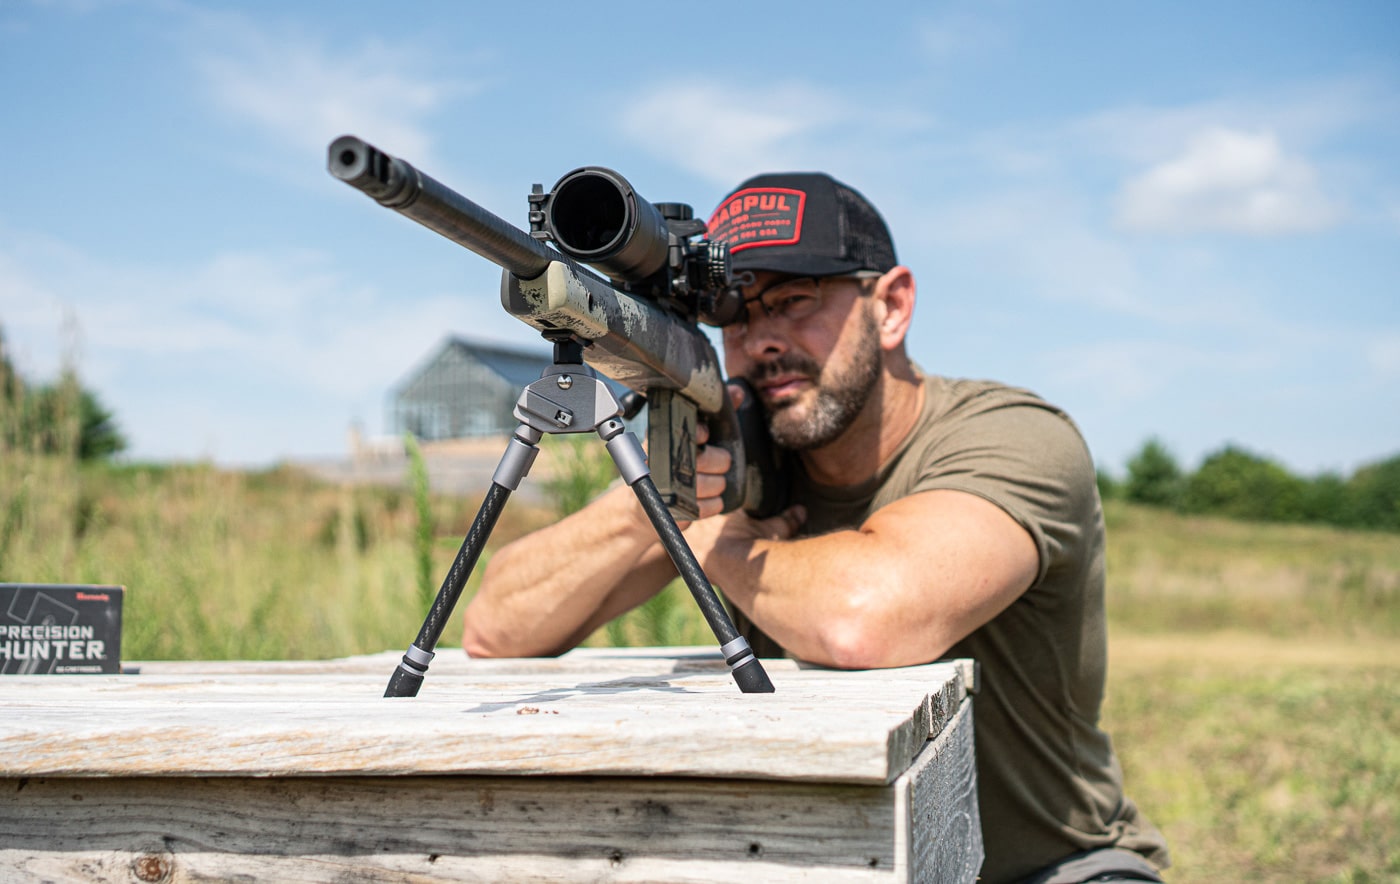 review of the spartan precision javelin pro bipod